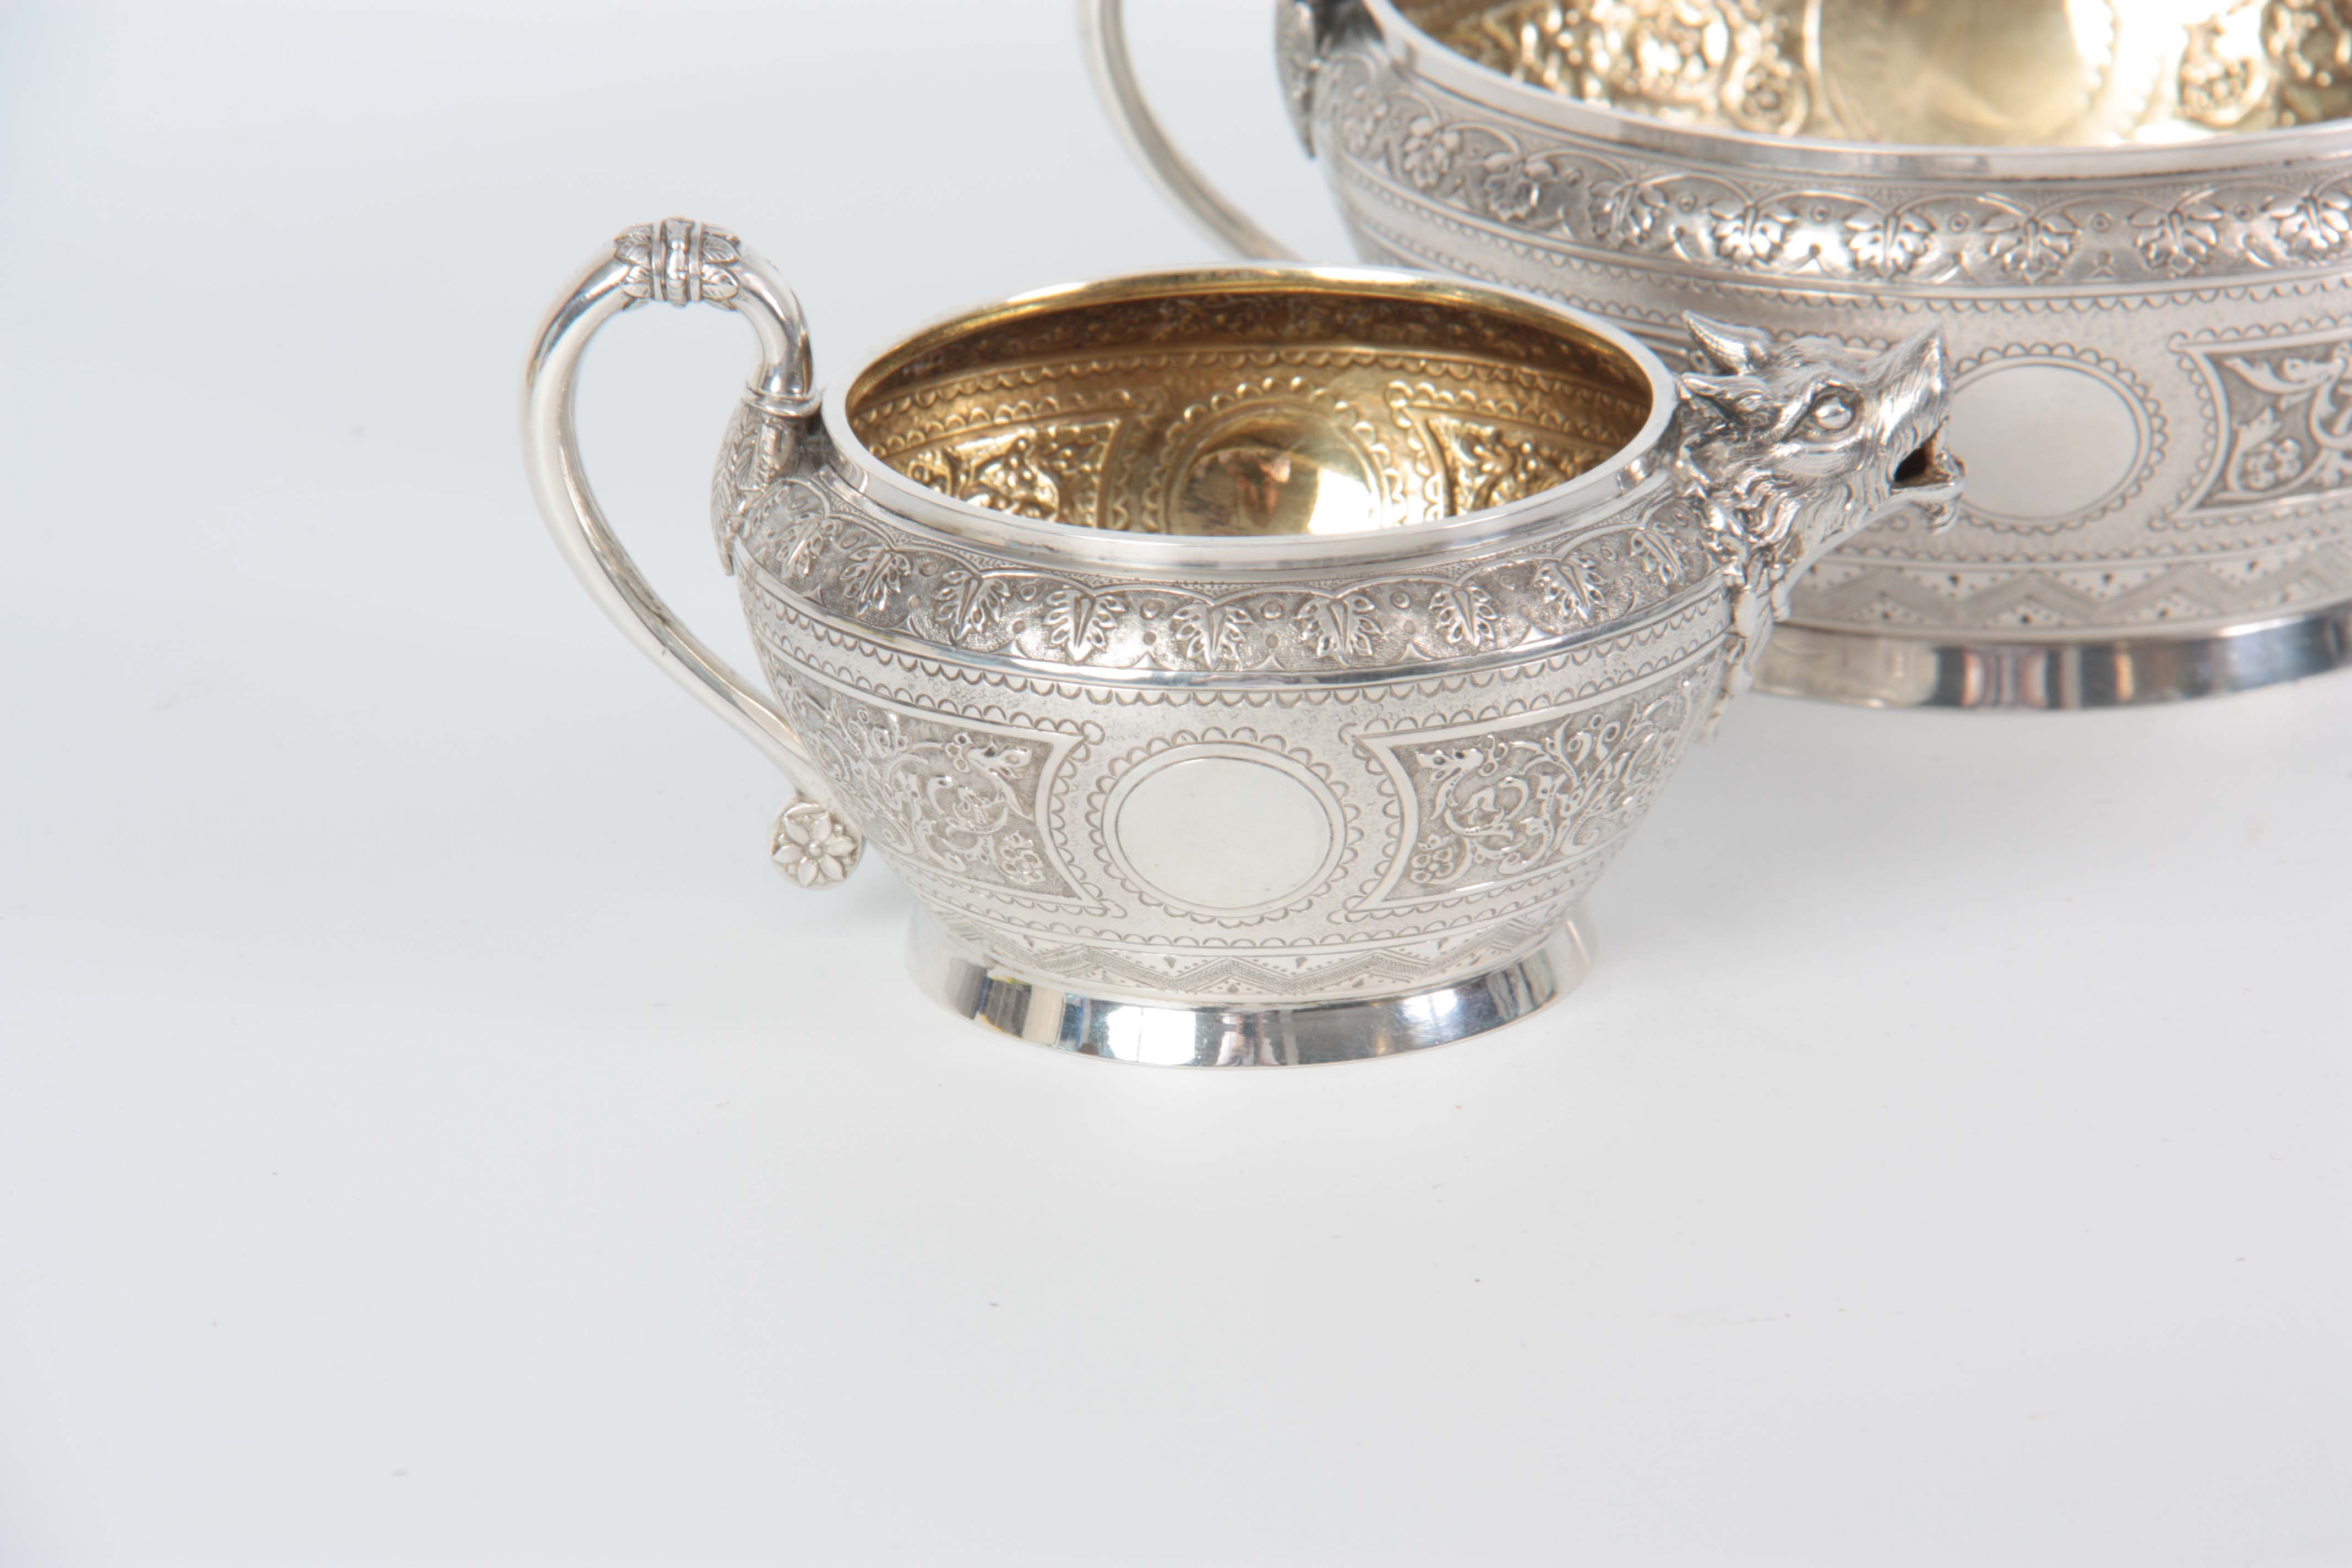 A VICTORIAN SILVER AND GILT CREAM JUG AND SUGAR BOWL having relief scroll-work panels and fine - Image 3 of 7